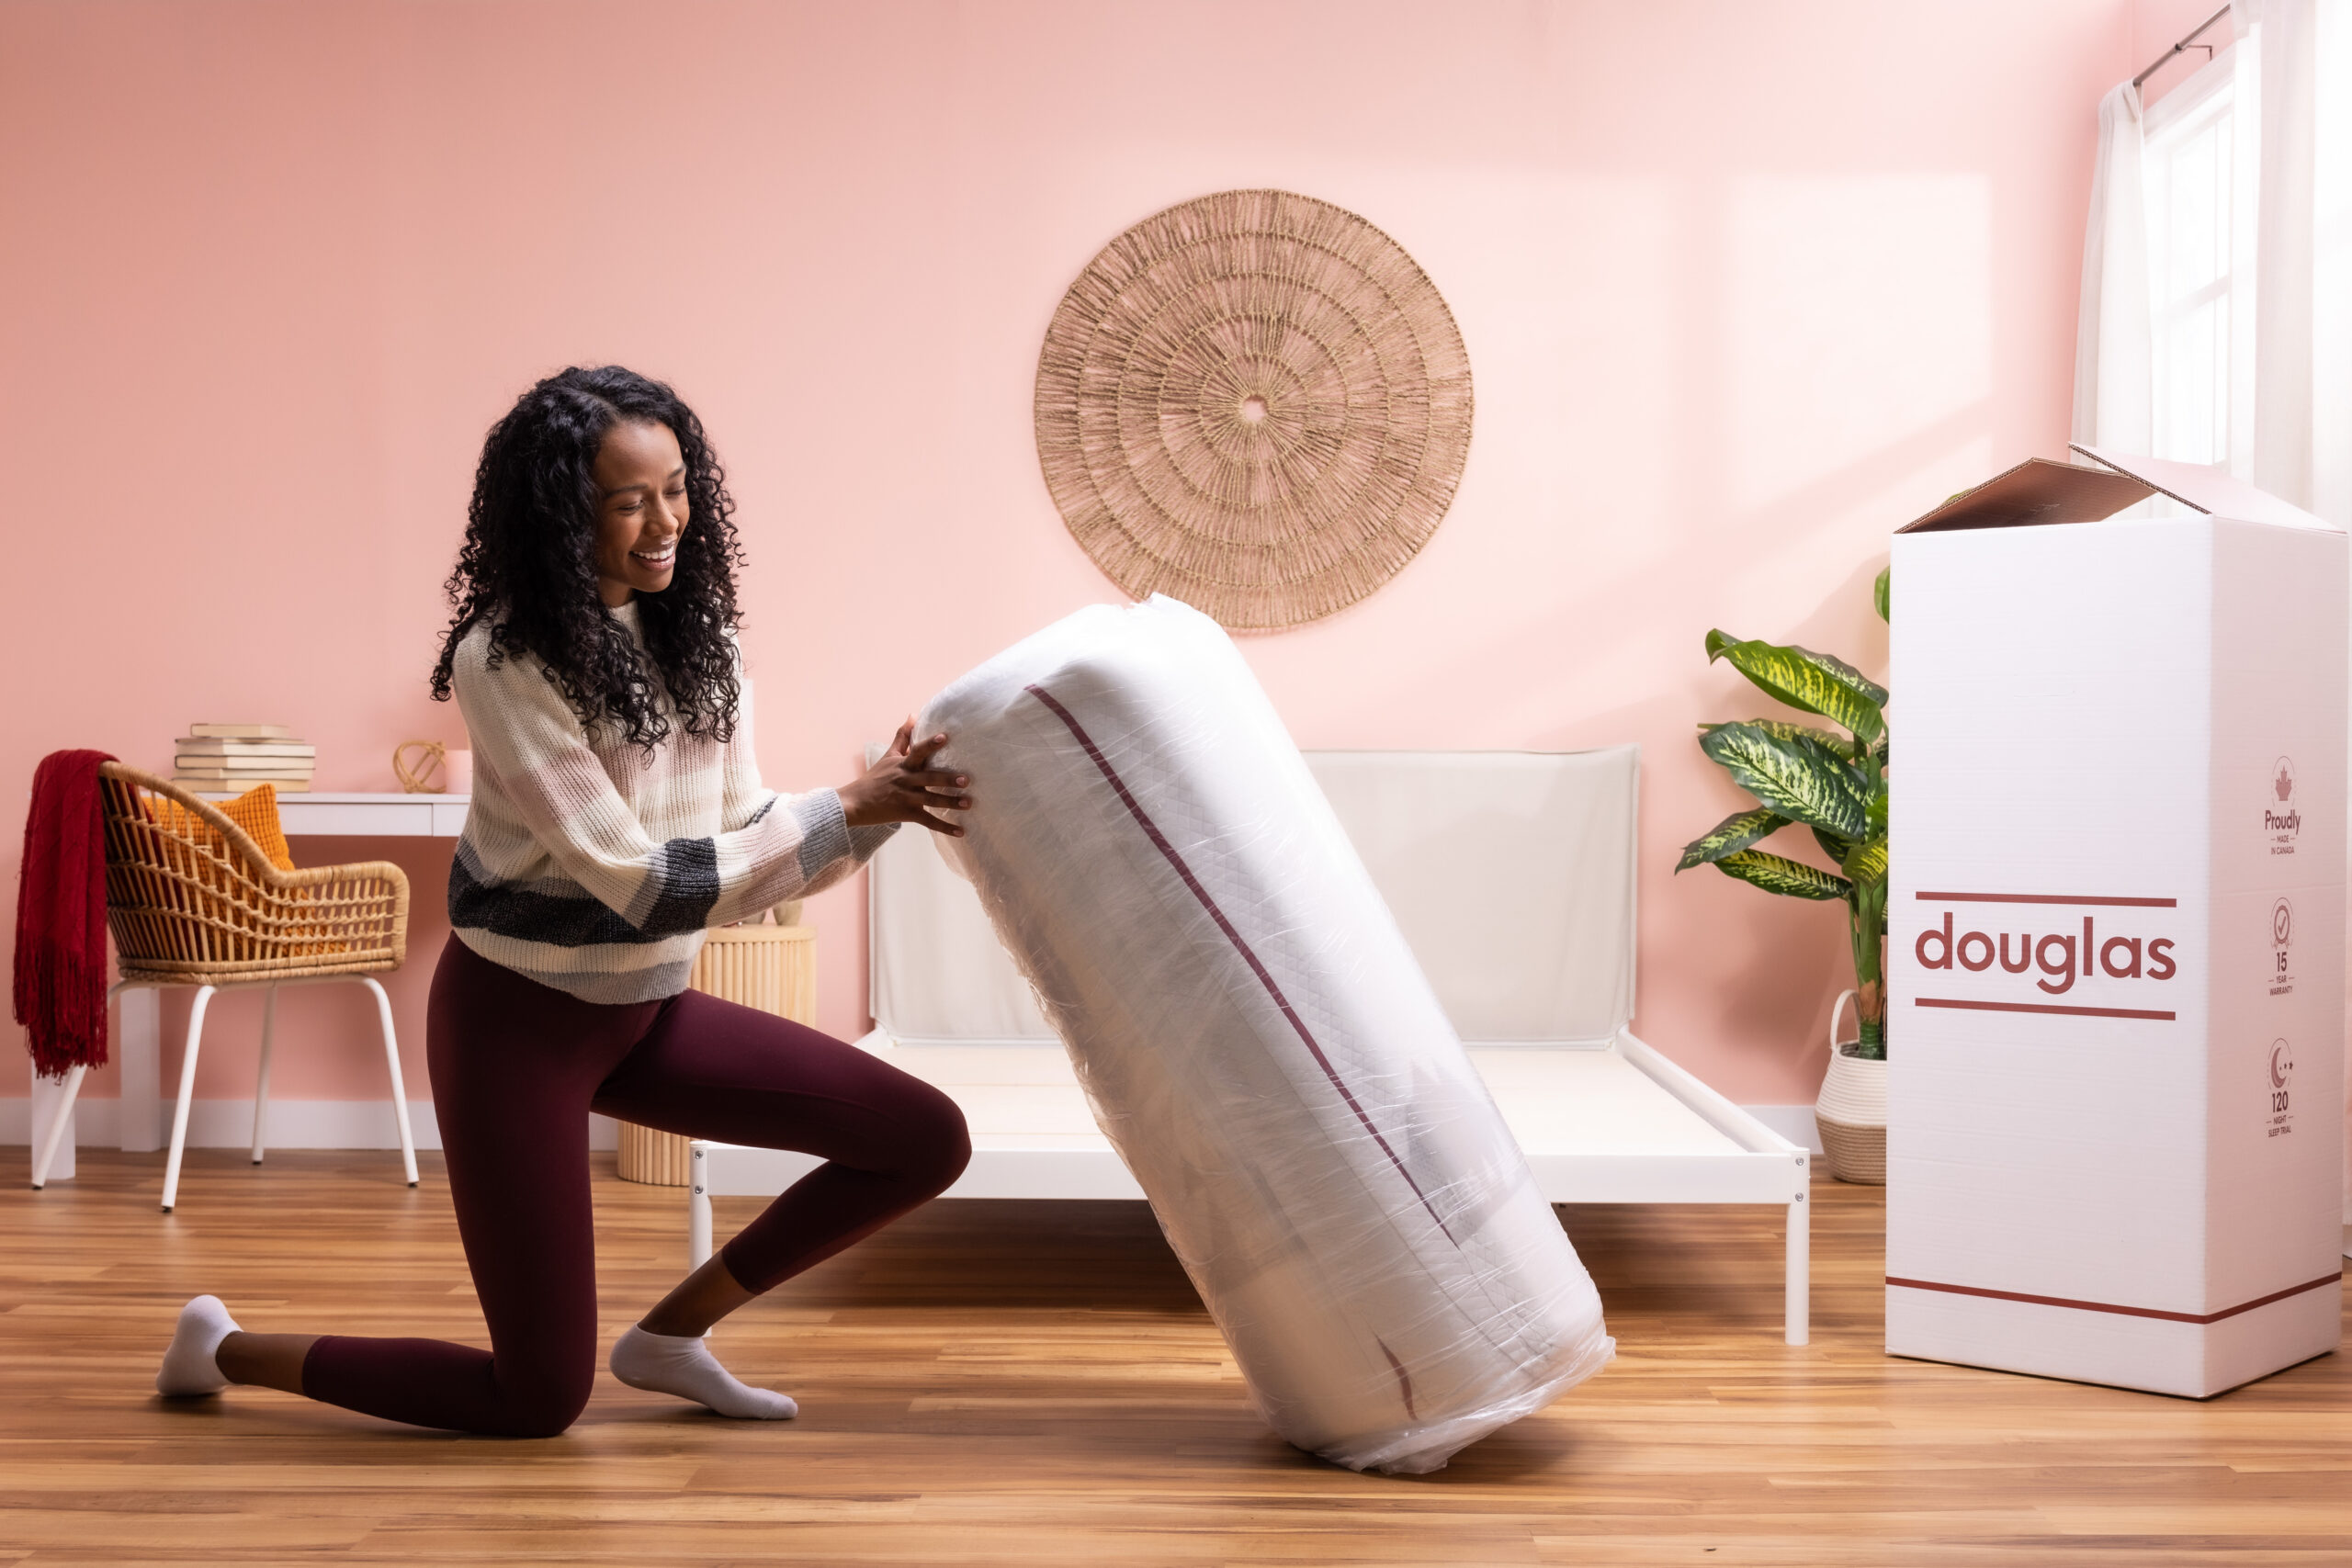 Photo of a person setting up their Douglas mattress.